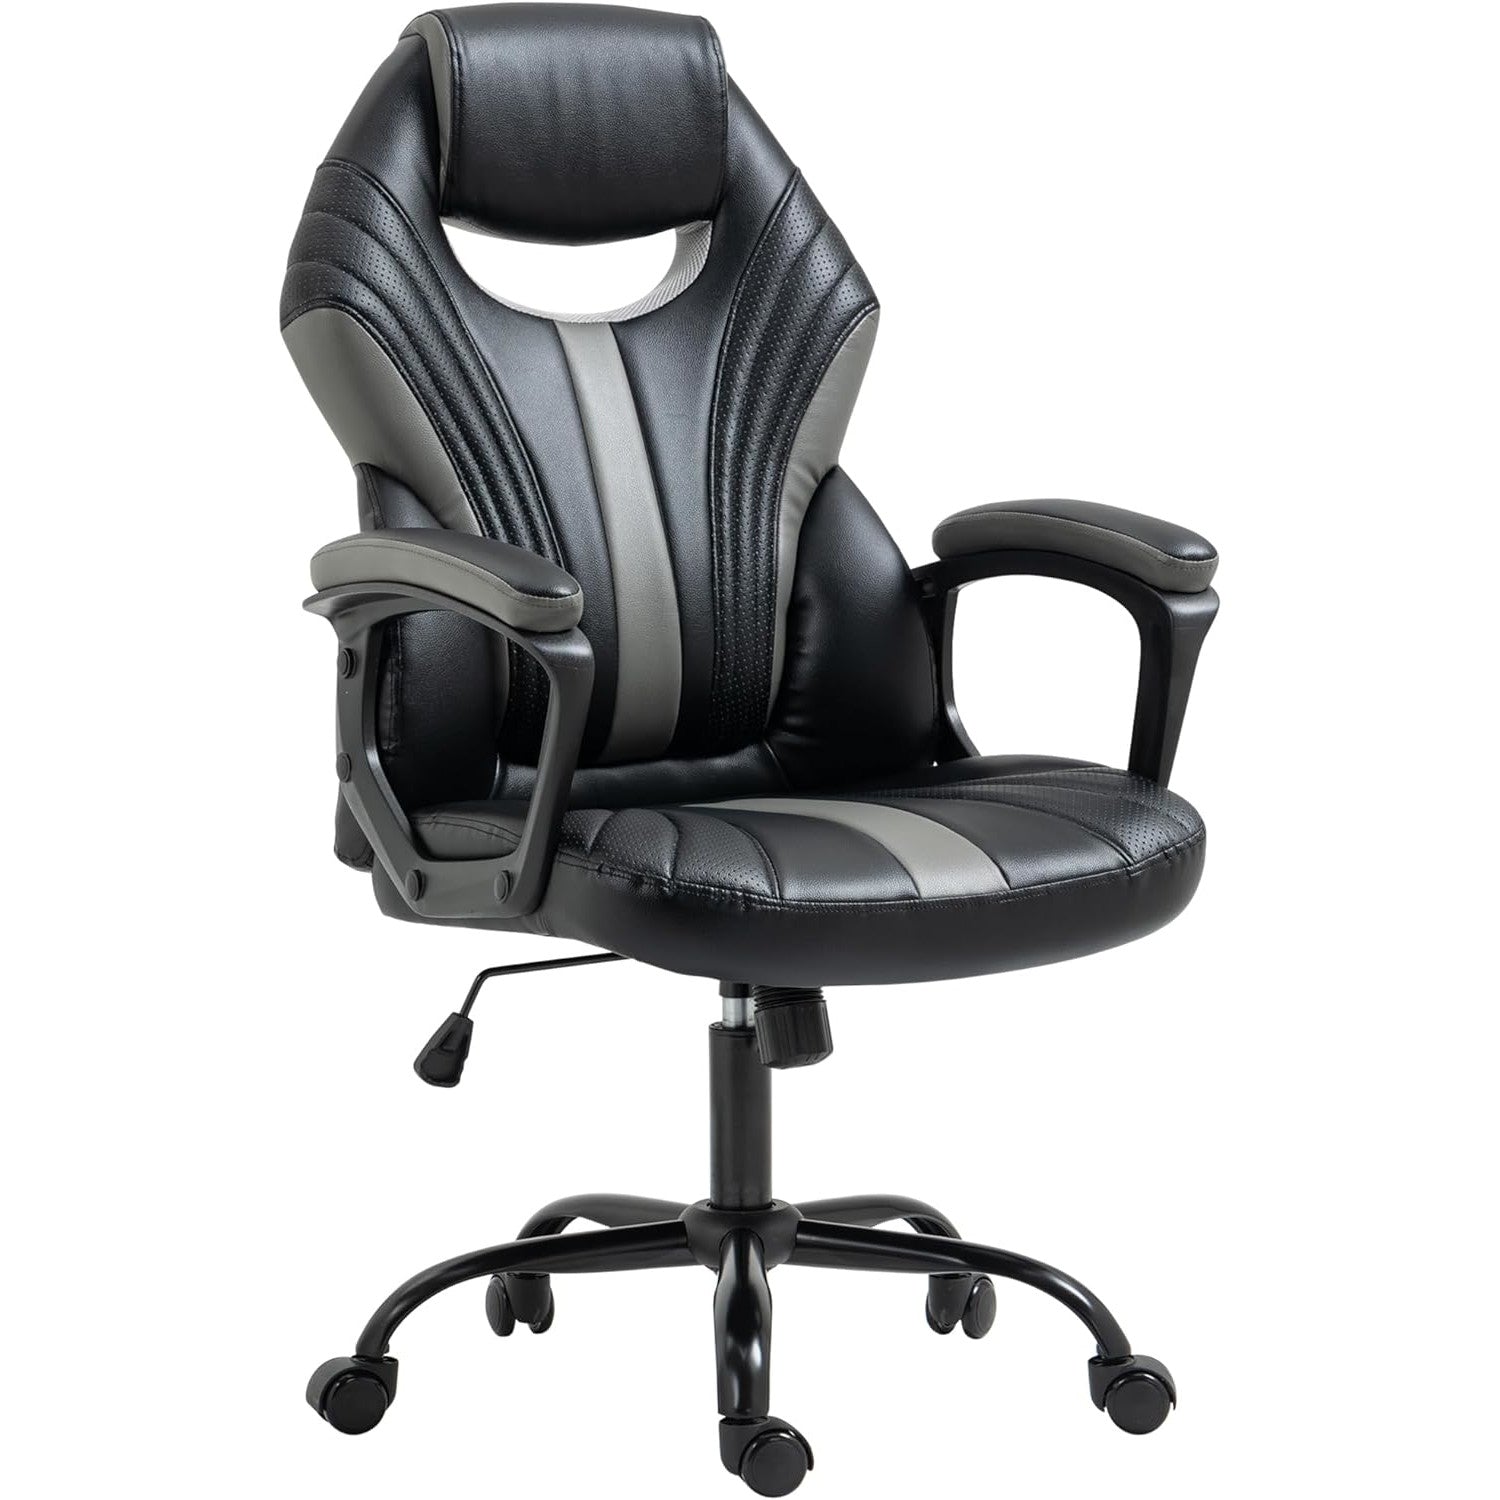 Maplin Plus Faux Leather Adjustable Swivel Gaming Chair - Black